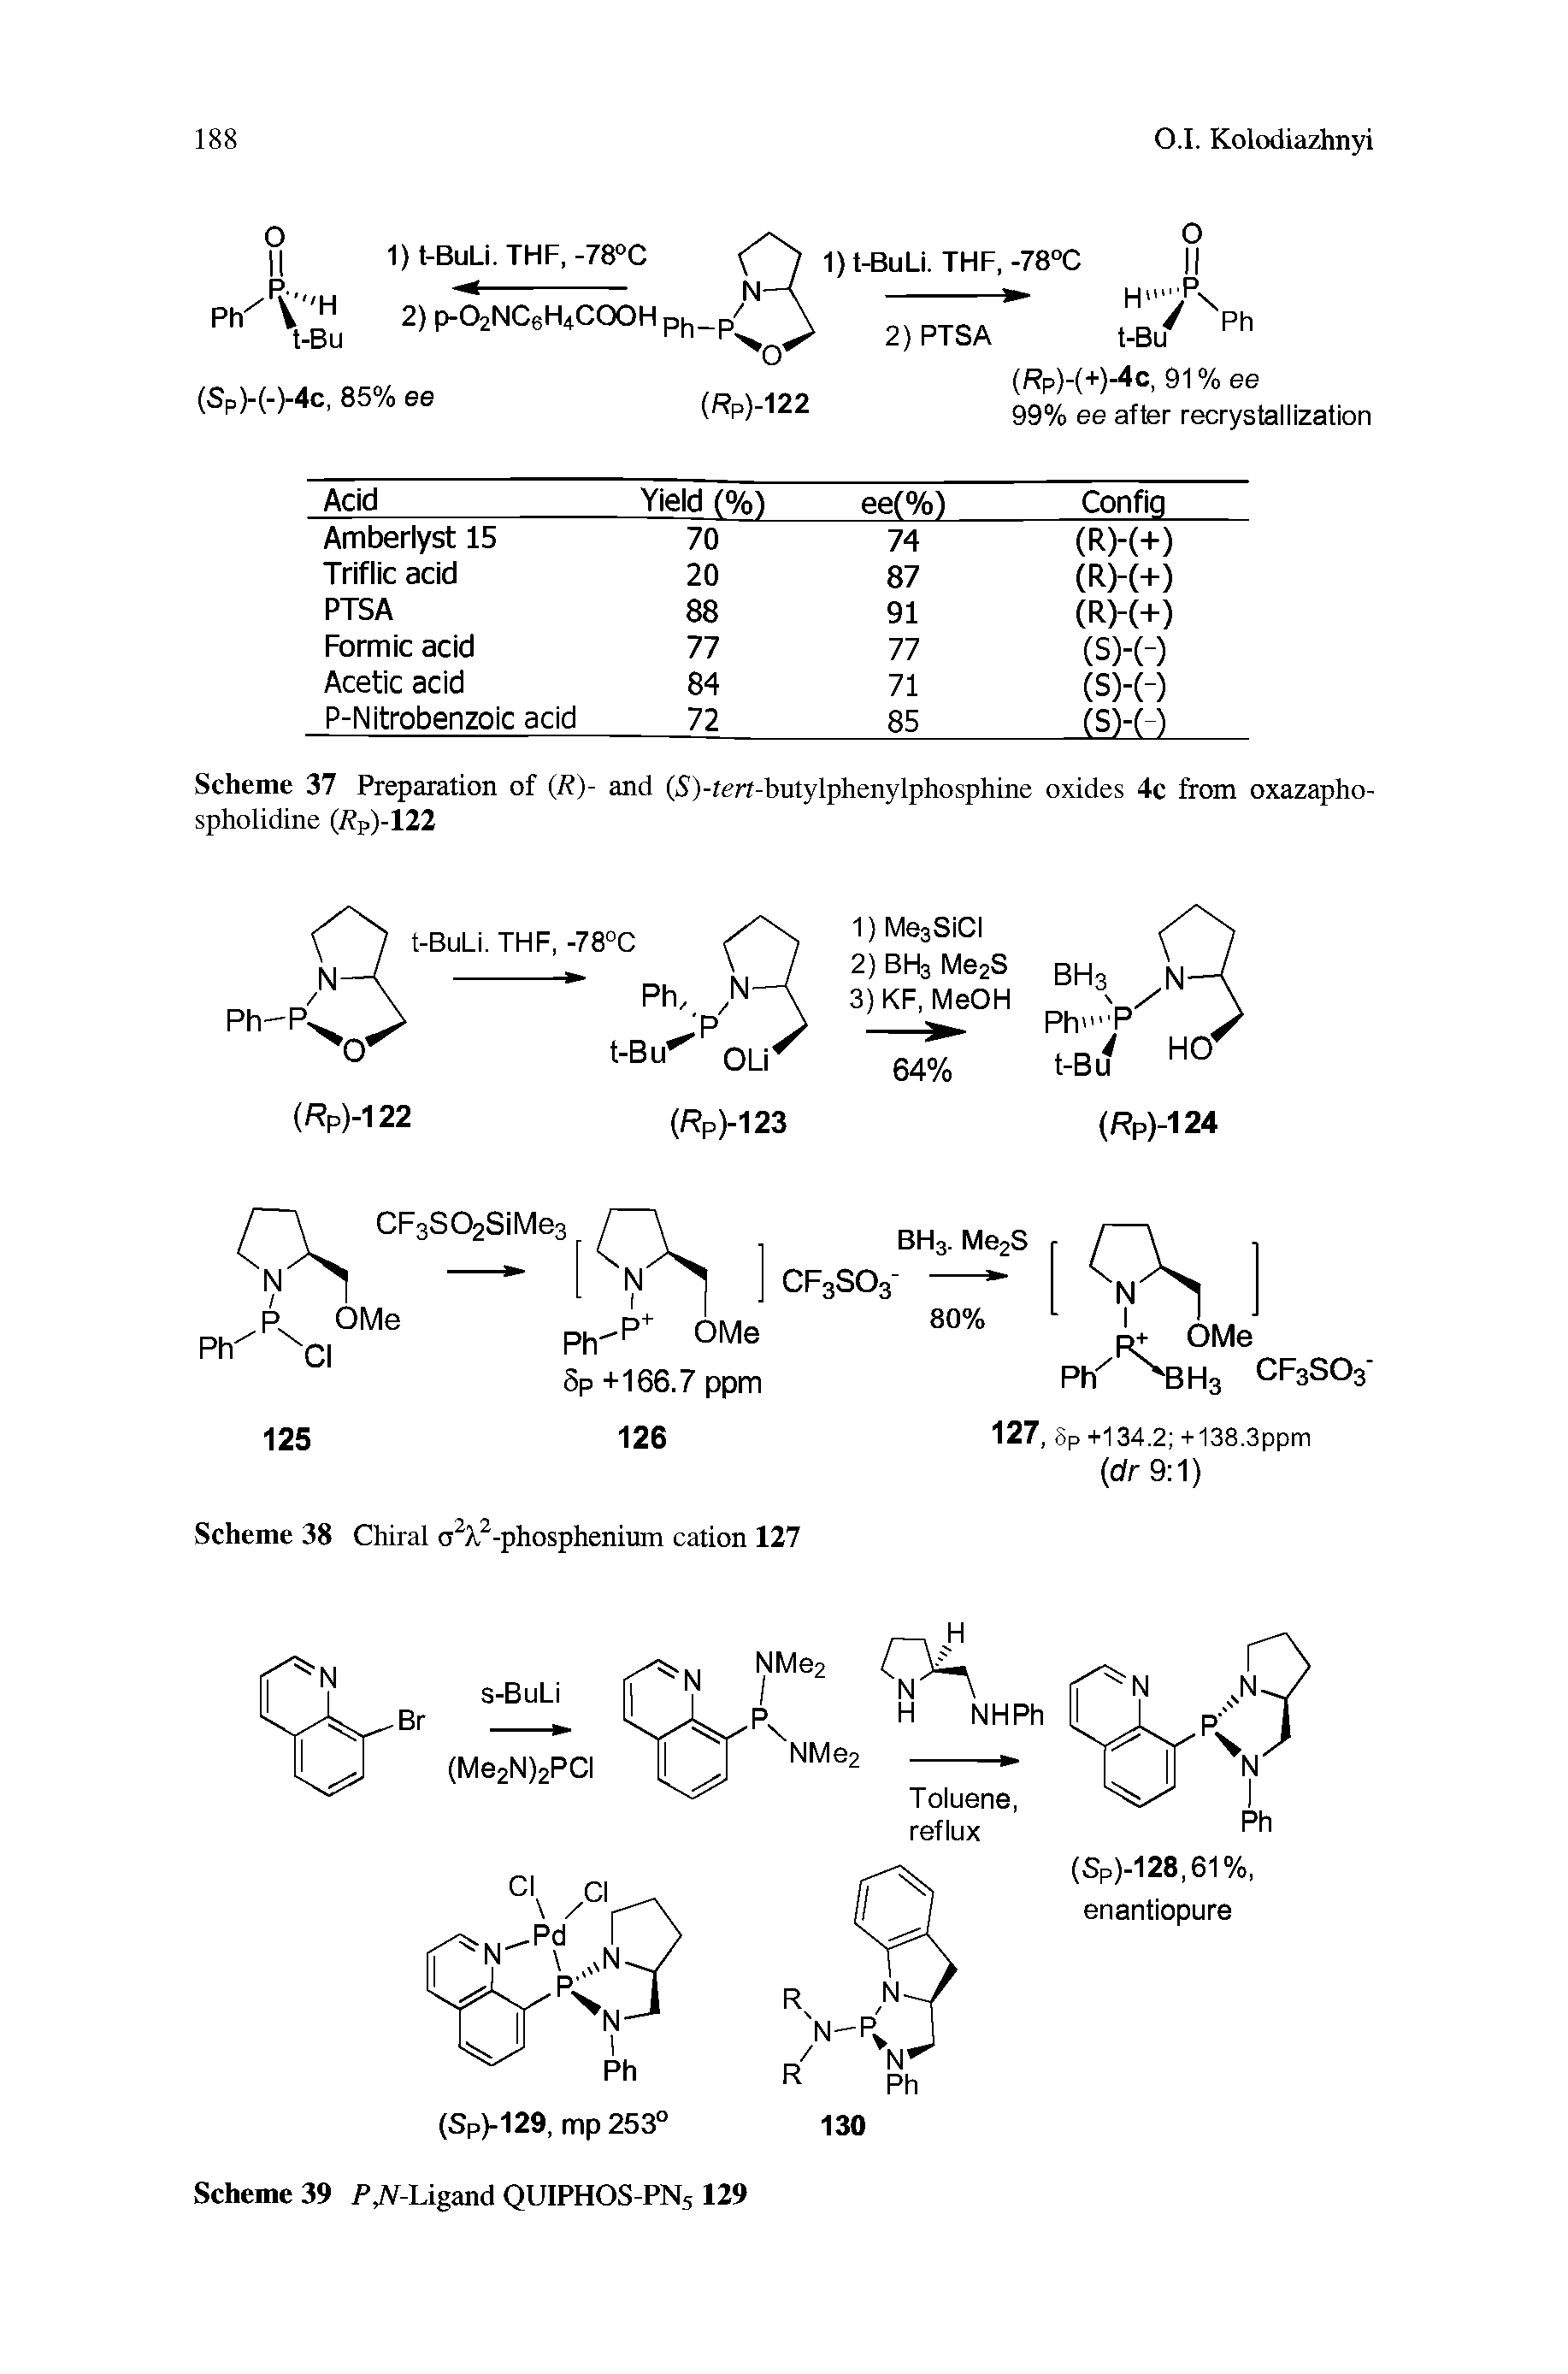 Scheme 37 Preparation of (R)- and (S)-tert-butylphenylphosphine oxides 4c from oxazapho-spholidine (/fp)-122...